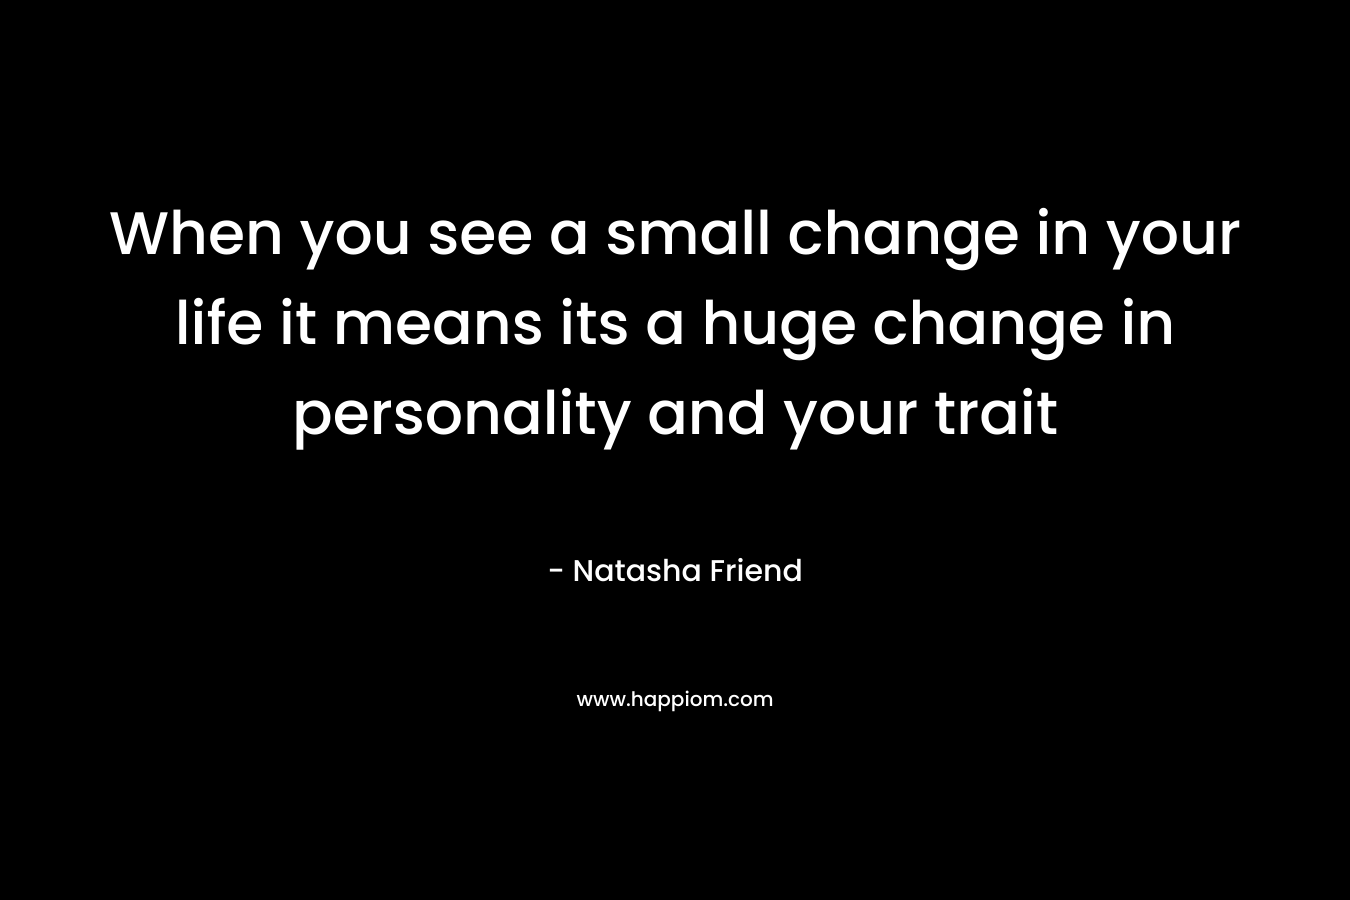 When you see a small change in your life it means its a huge change in personality and your trait – Natasha Friend